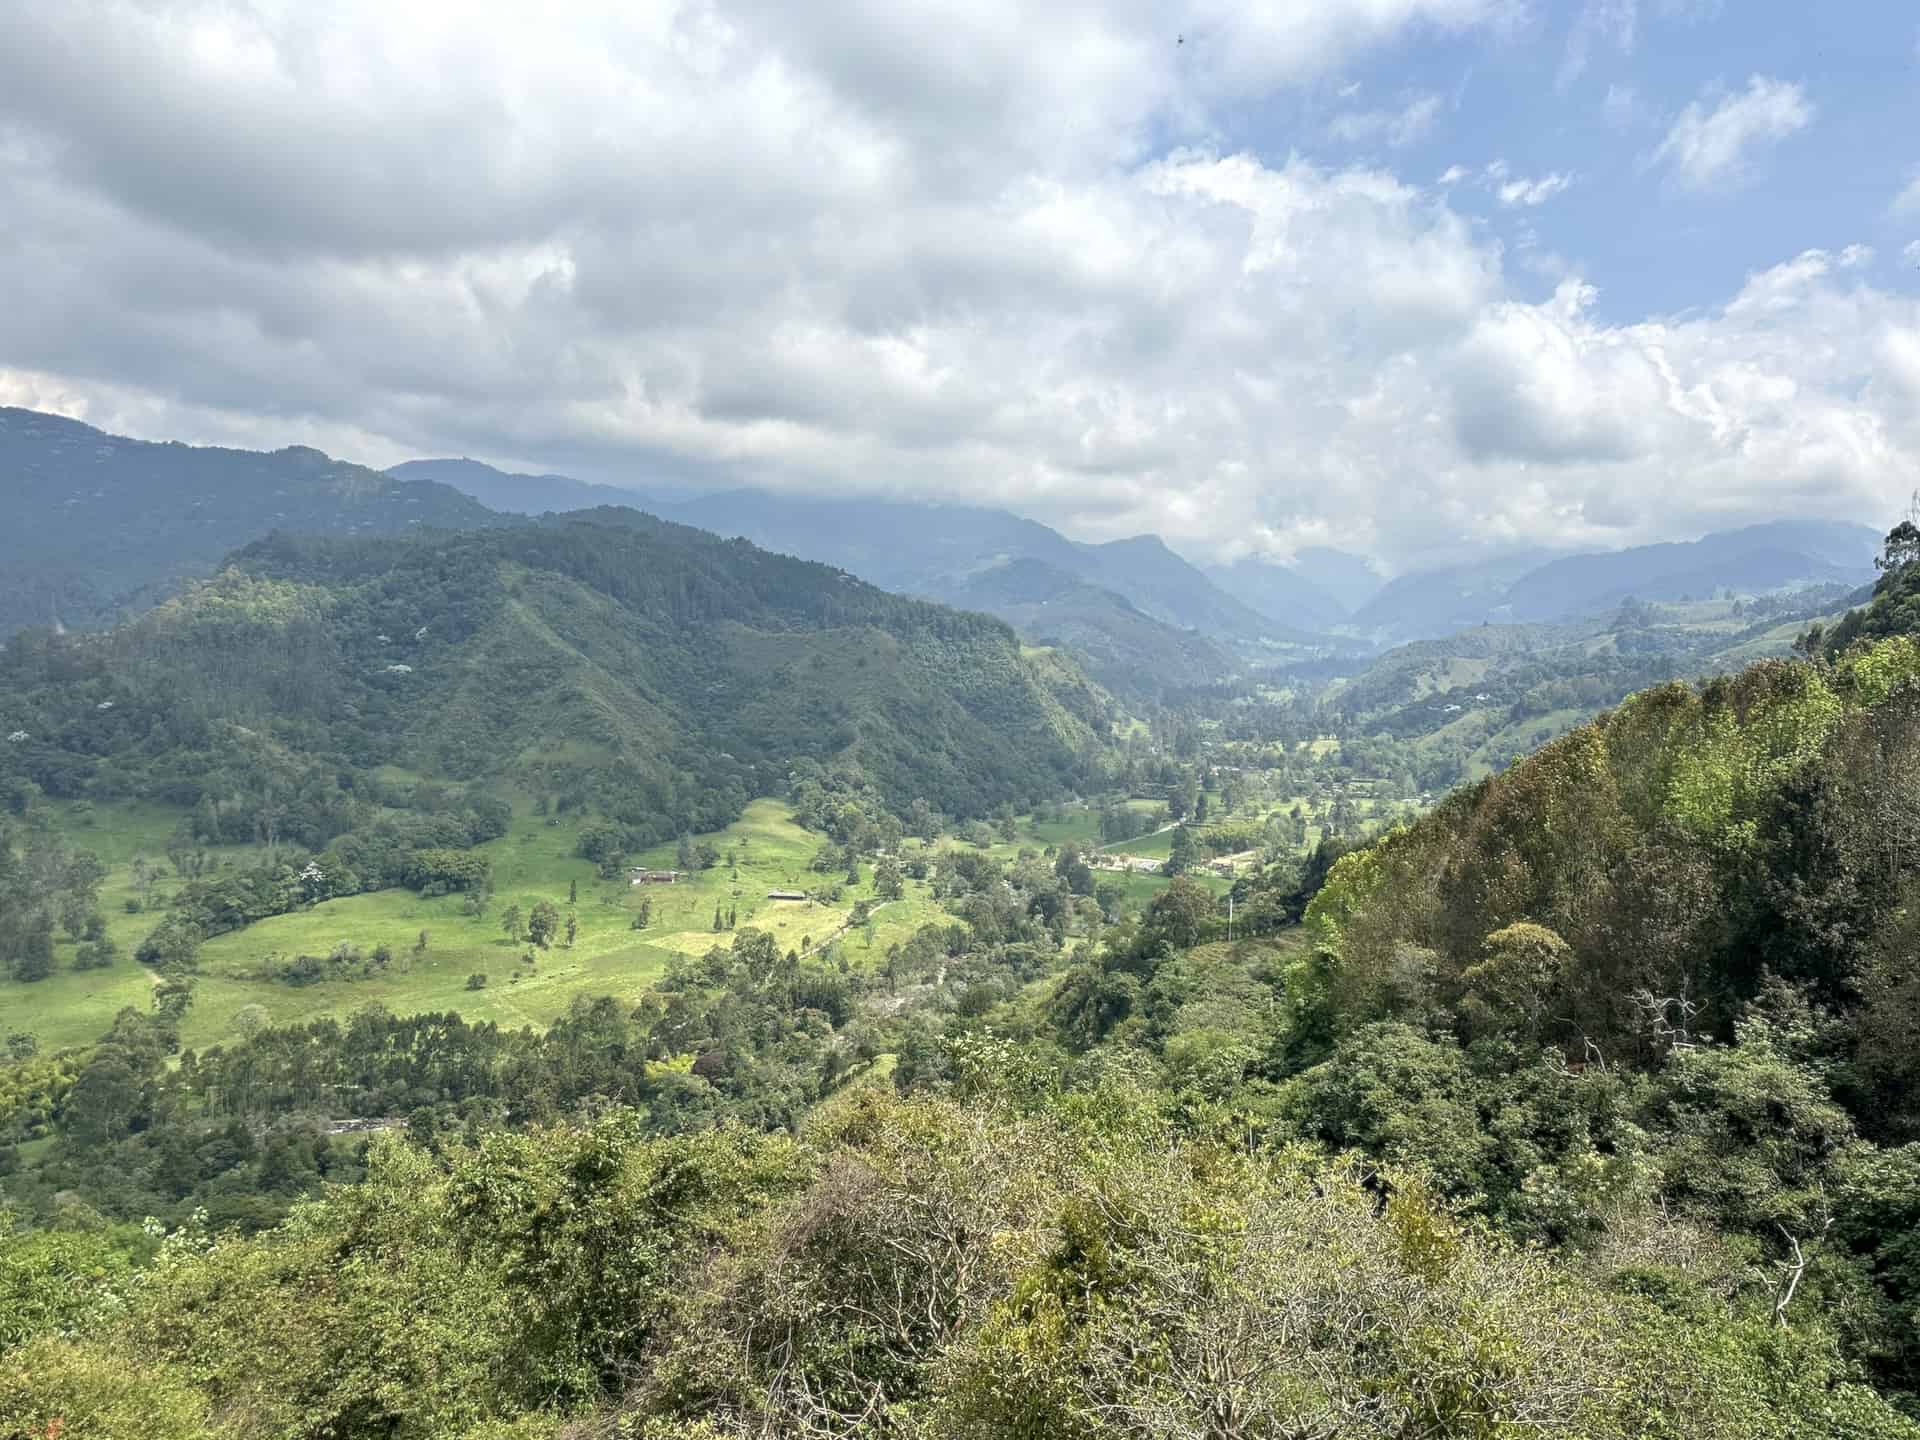 Looking down the Cocora Valley